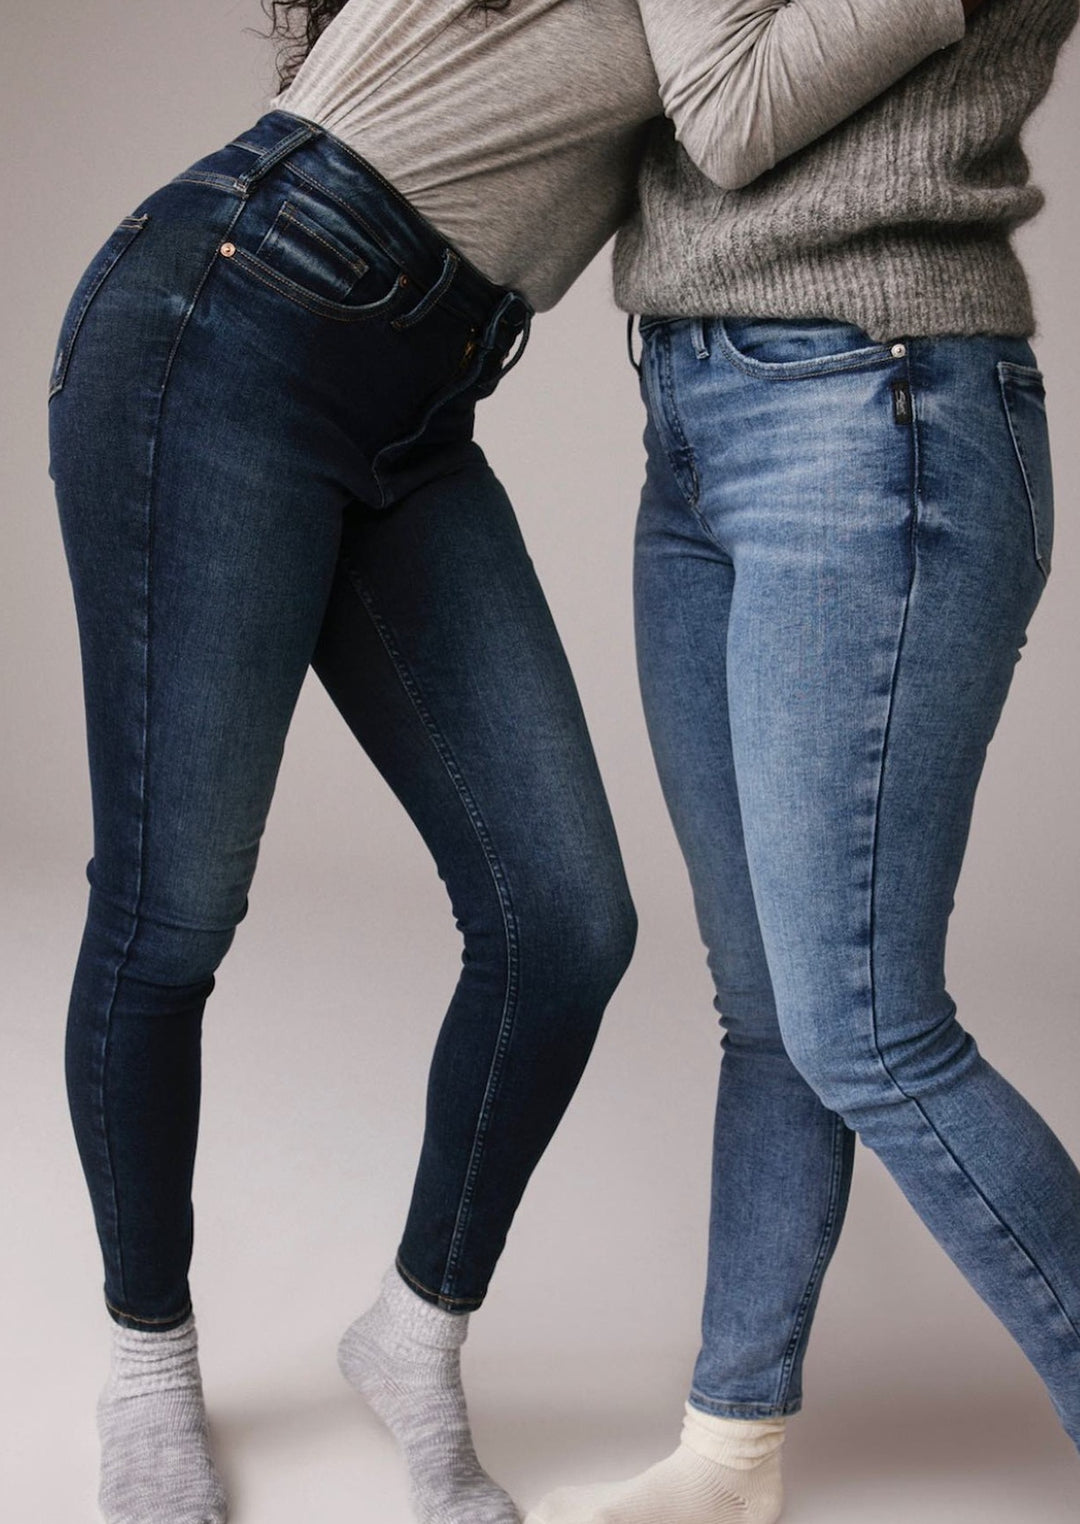 Comfiest jeans for women by Silver Jeans Canada